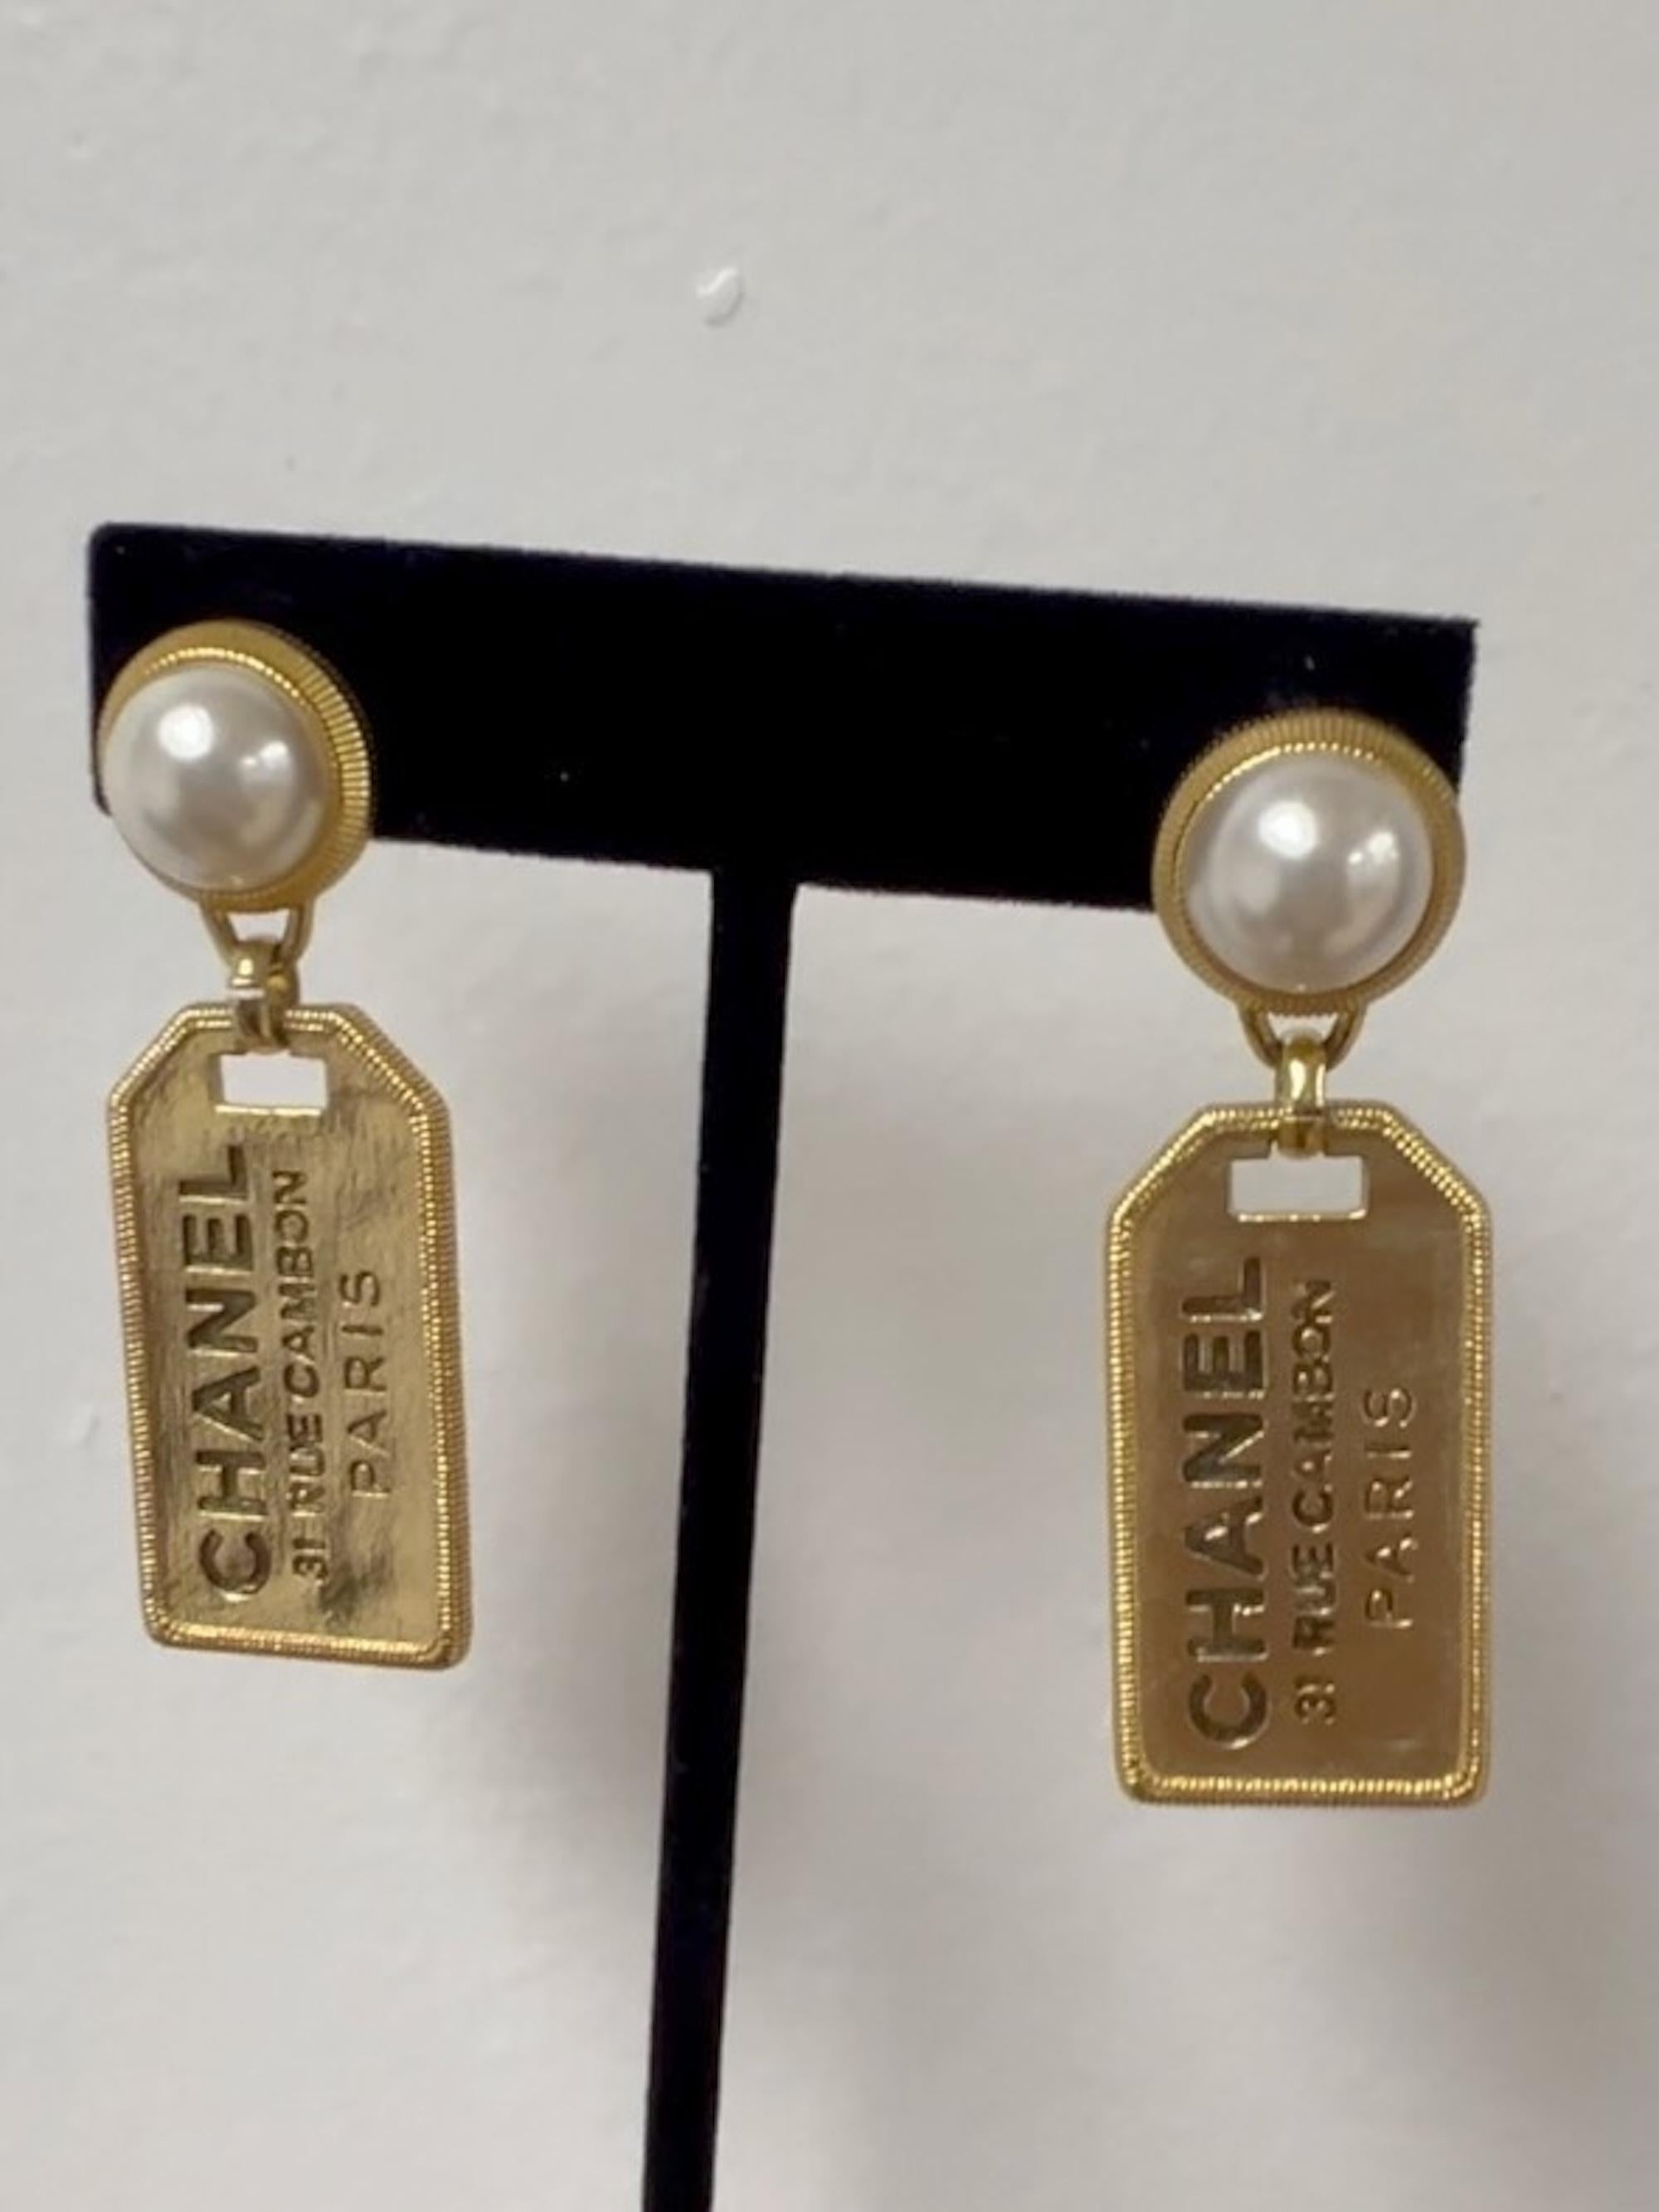 Introducing Chanel mini tag earrings in gold tone metal with faux pearls. The tags are engraved with the 31 Rue Cambon address, which is the flagship location of Chanel in Paris.

100% Authentic

Marks: Chanel logo 2020
Clasp Style: clip ons
Year: